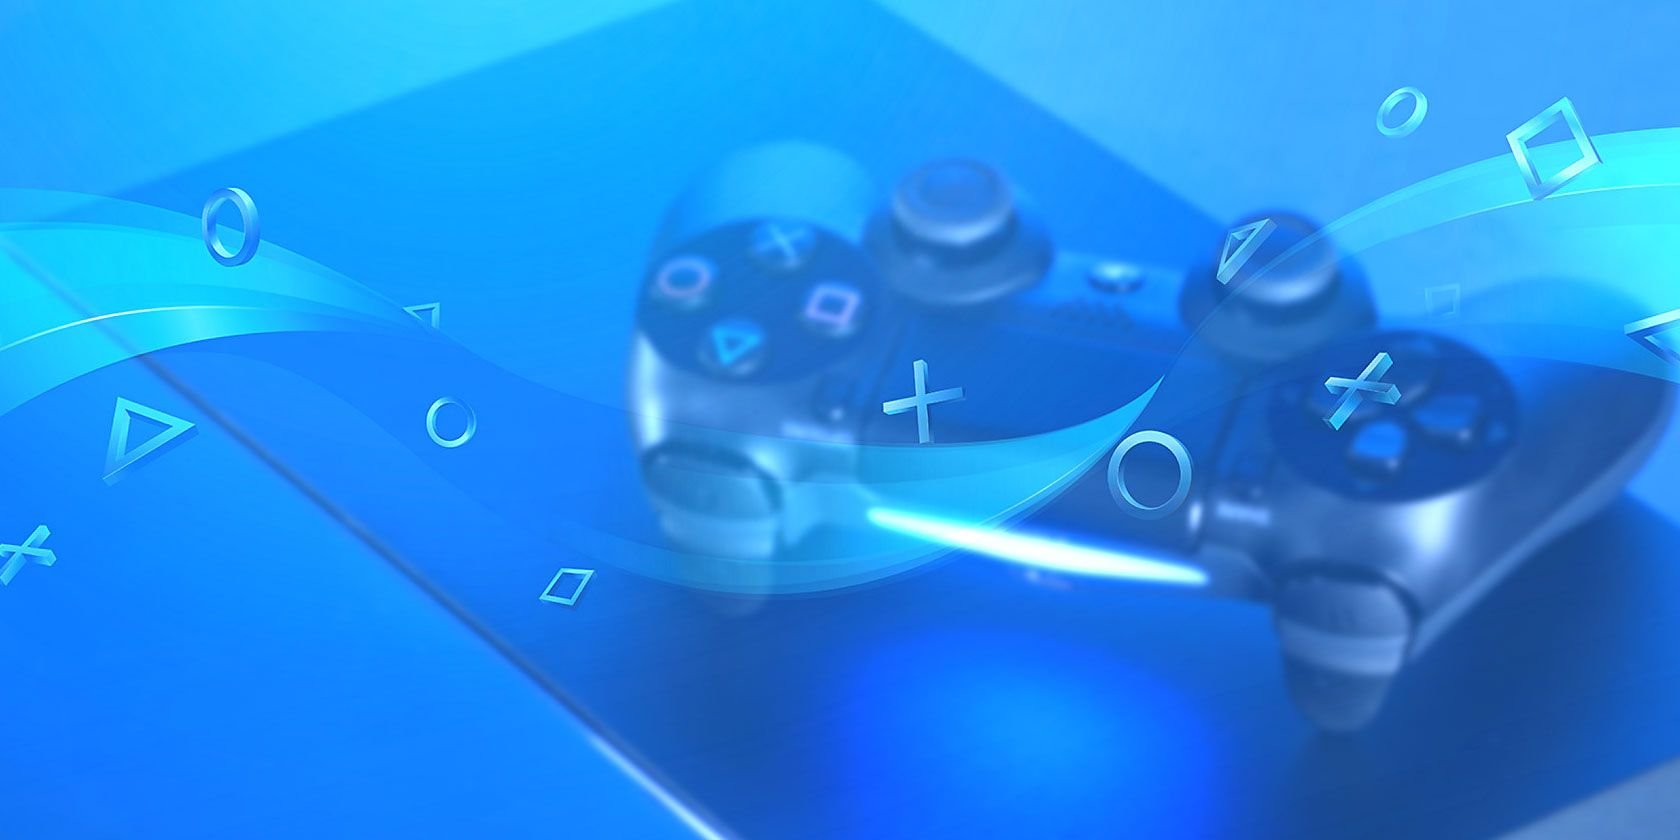 Everything You Need to Know About the PlayStation 5 (PS5)